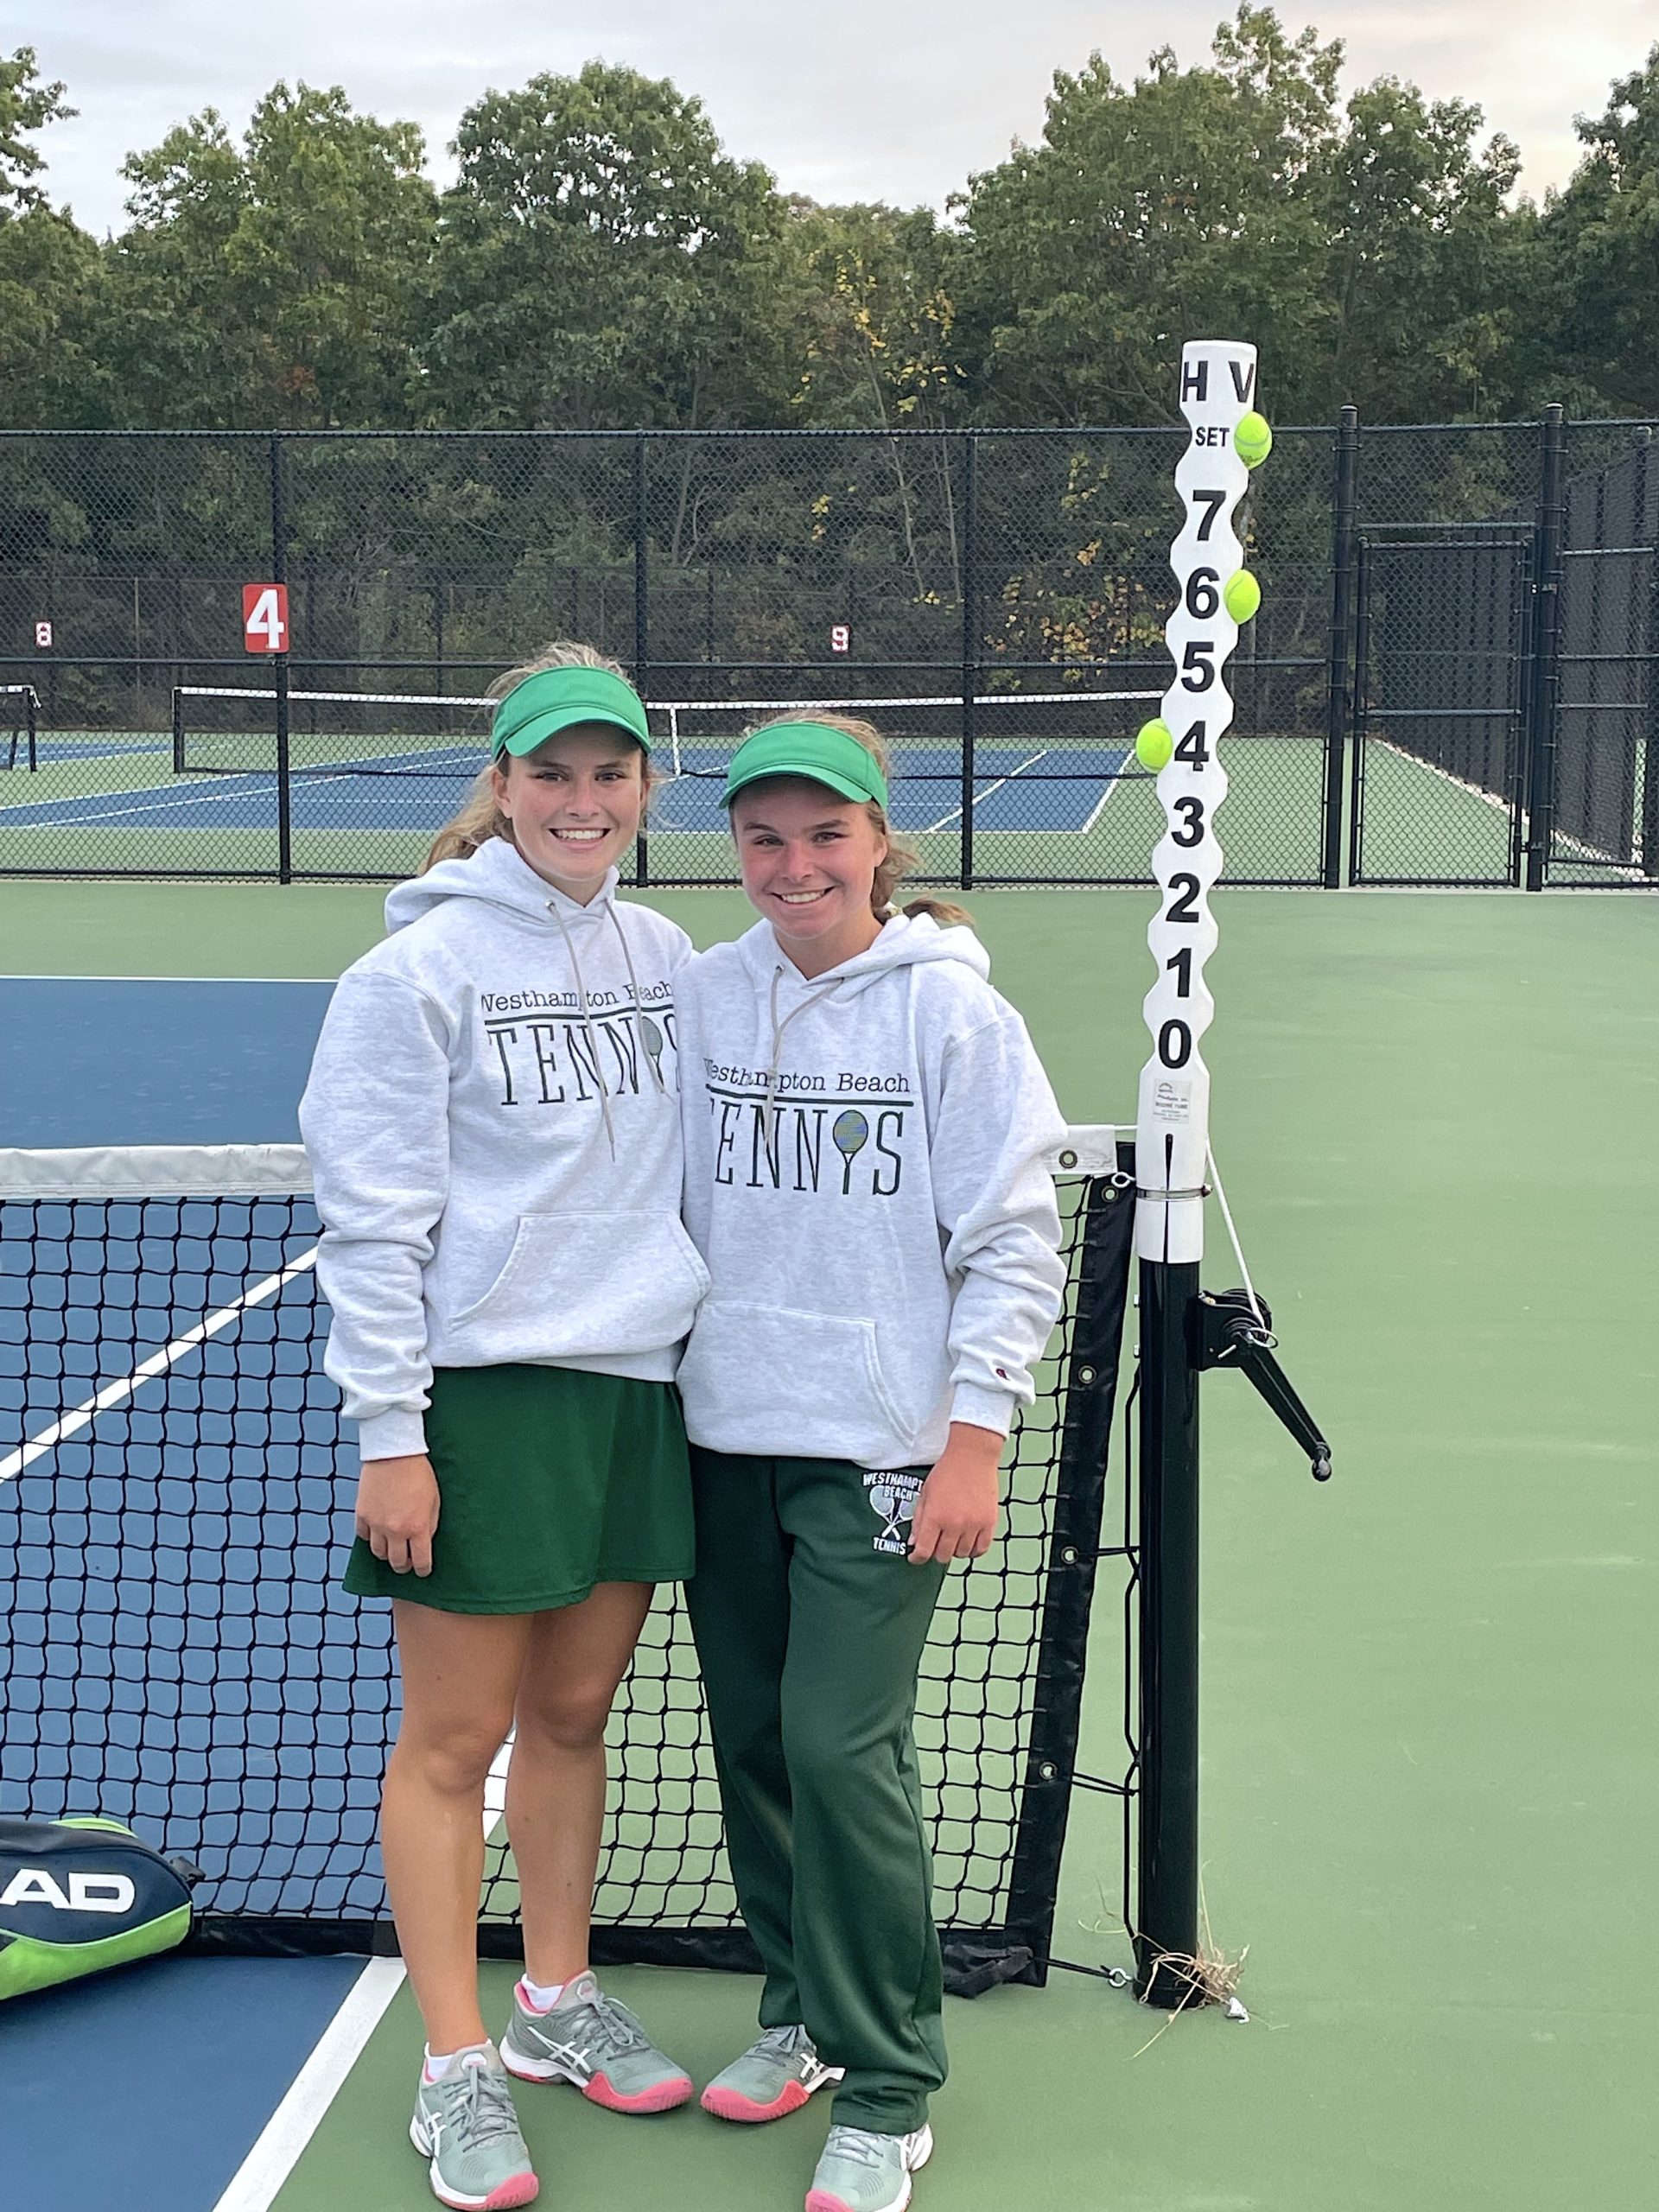 Westhampton Beach sisters Katelyn and Julia Stabile finished first in the Suffolk County doubles tournament at Smithtown East High School October 23.